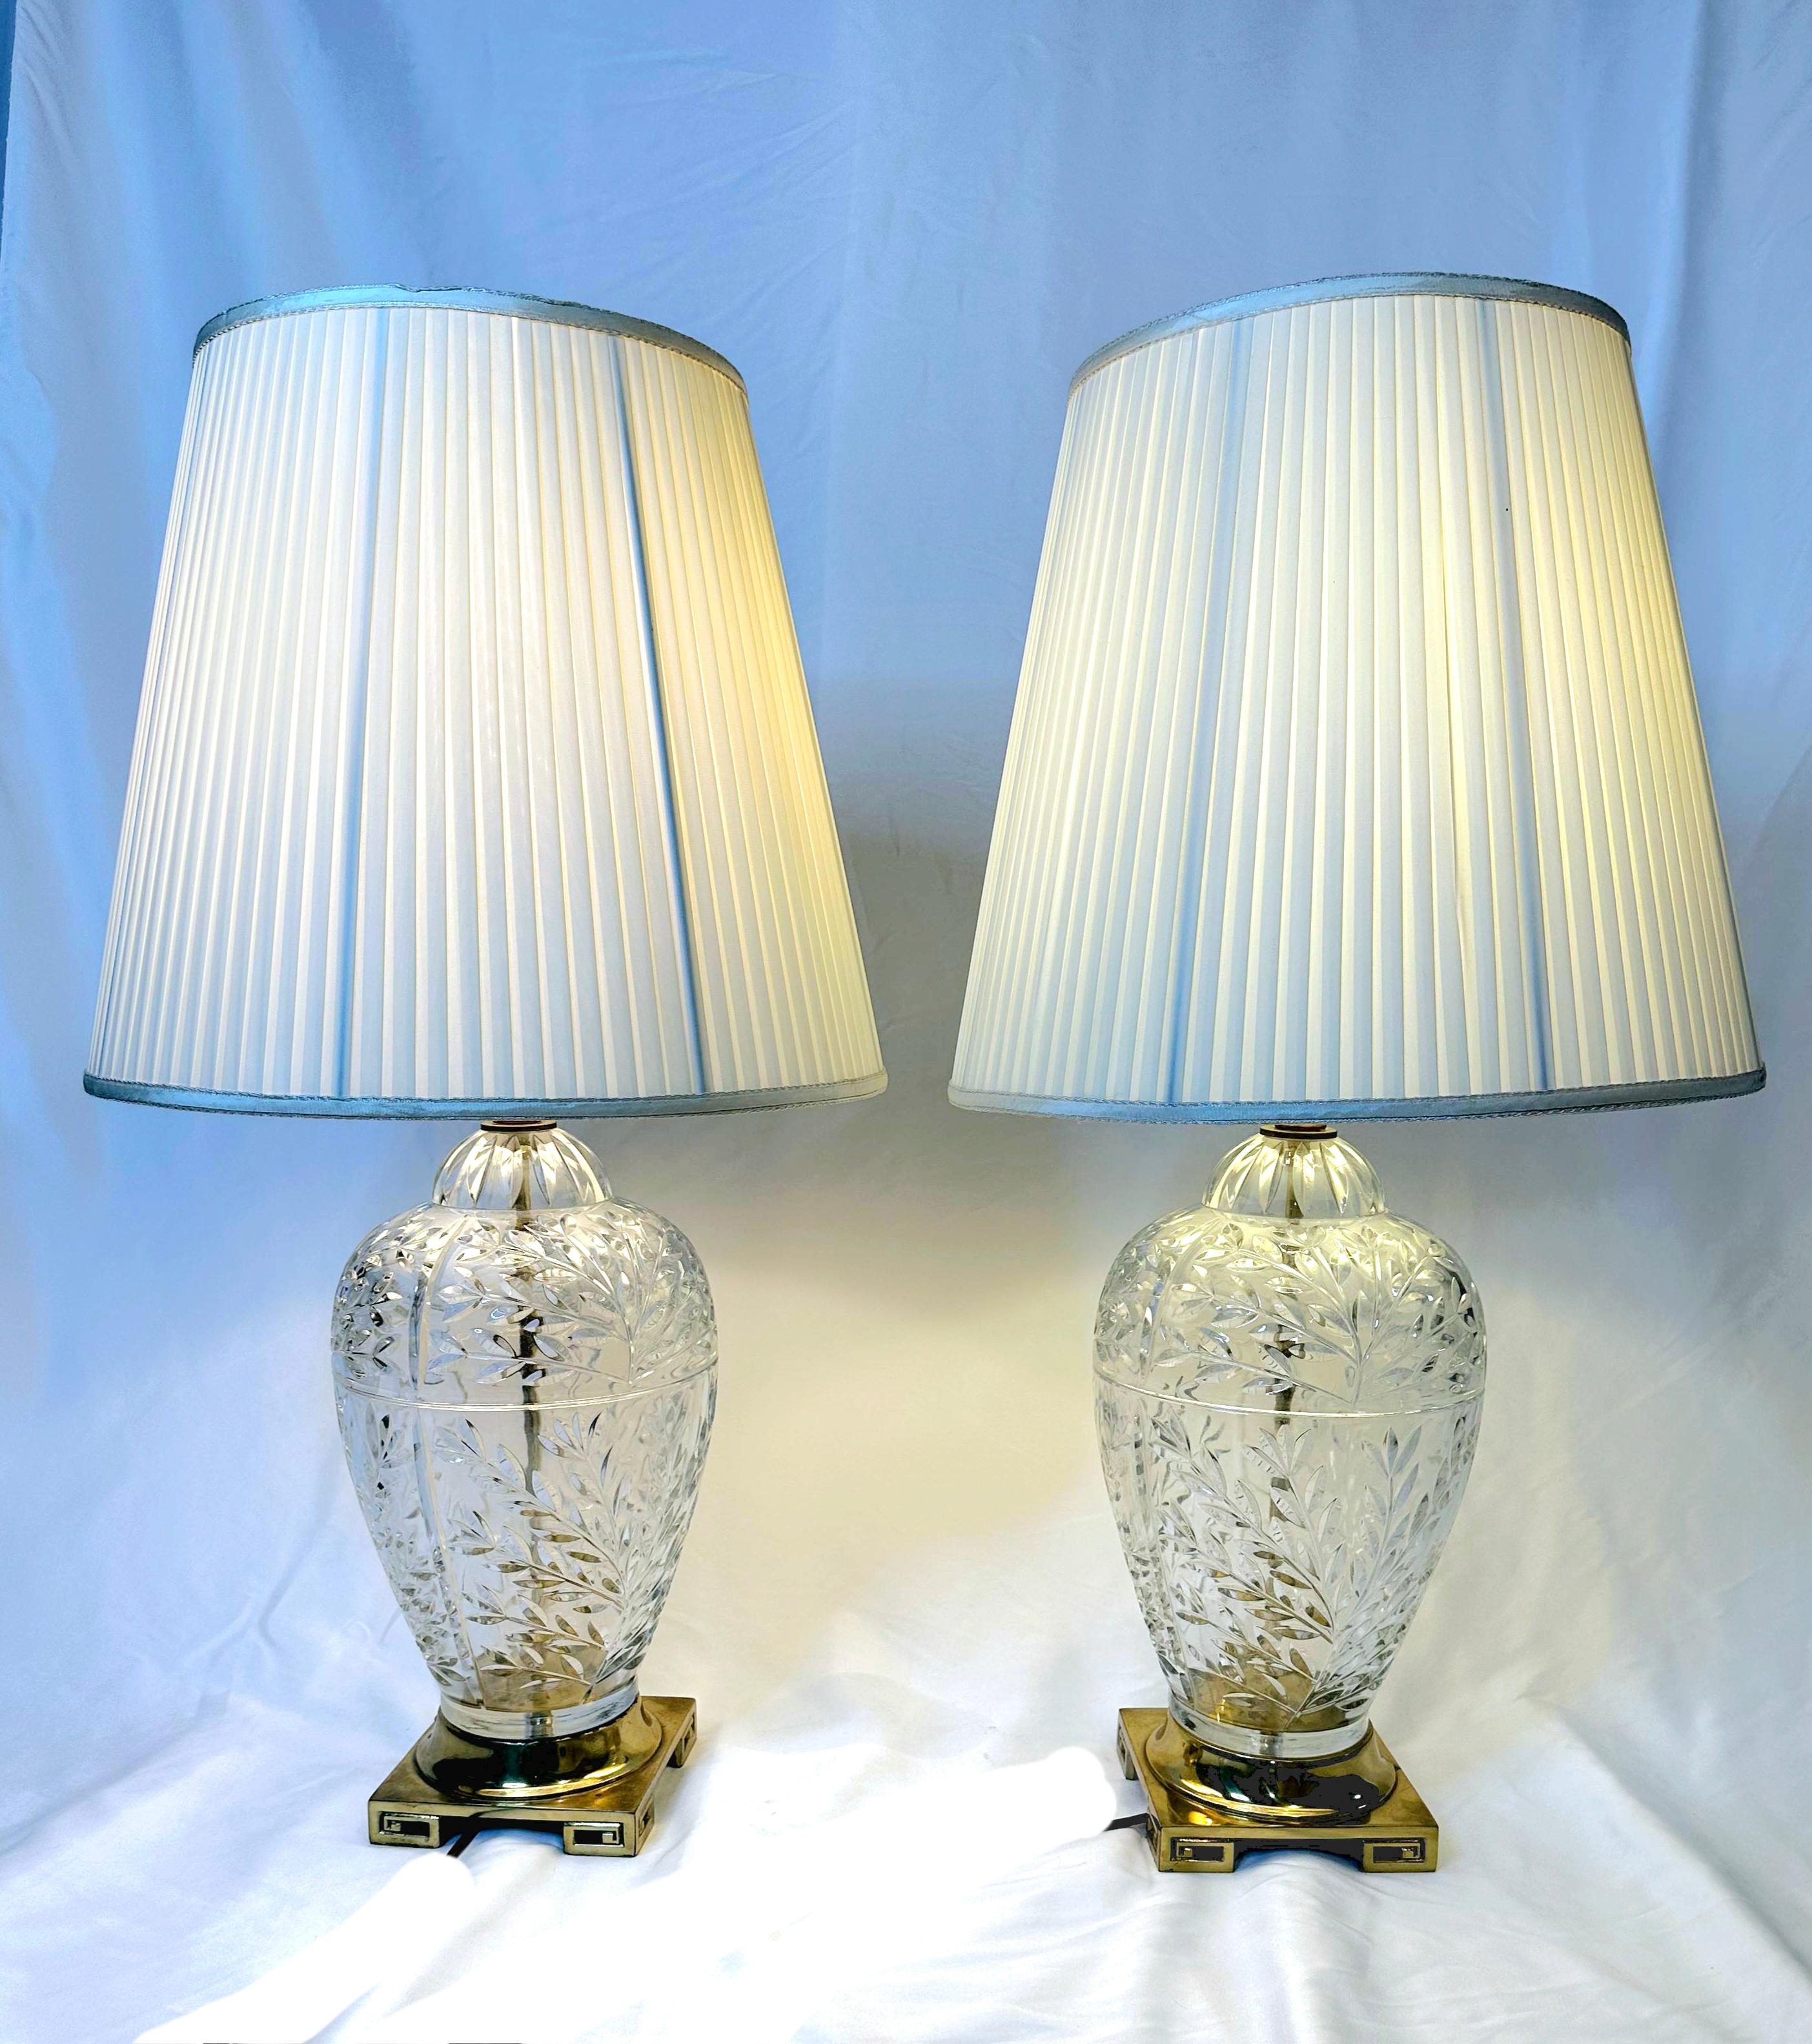 Pair Vintage French style single cut crystal glass bulbous table lamps brass Greek key base. Lamps feature a leafy design bulbous crystal body, brass finish greek key base.
Stunning 60 year old lamps, look brand new.
Quality craftsmanship, great